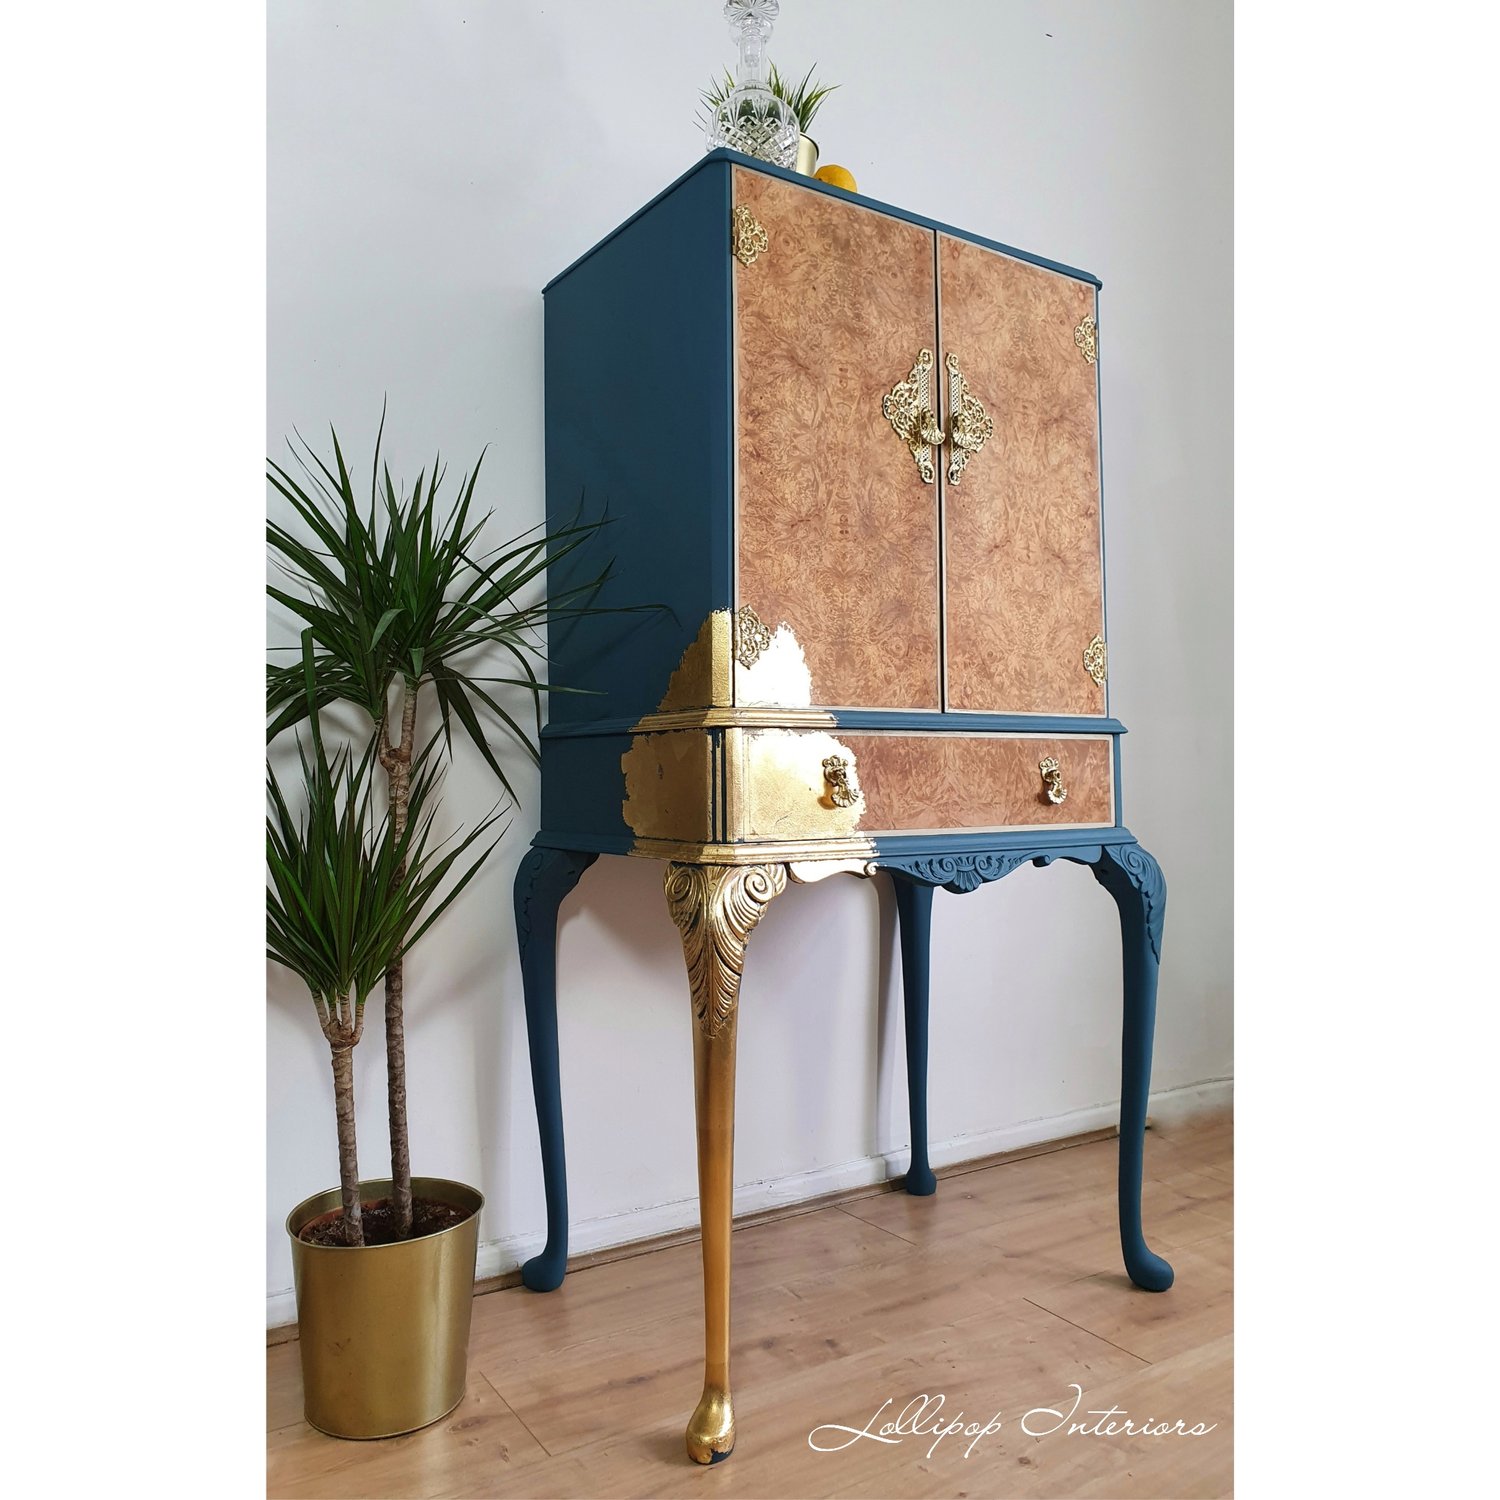 Image of Cocktail cabinet in teal with gold leaf detailing